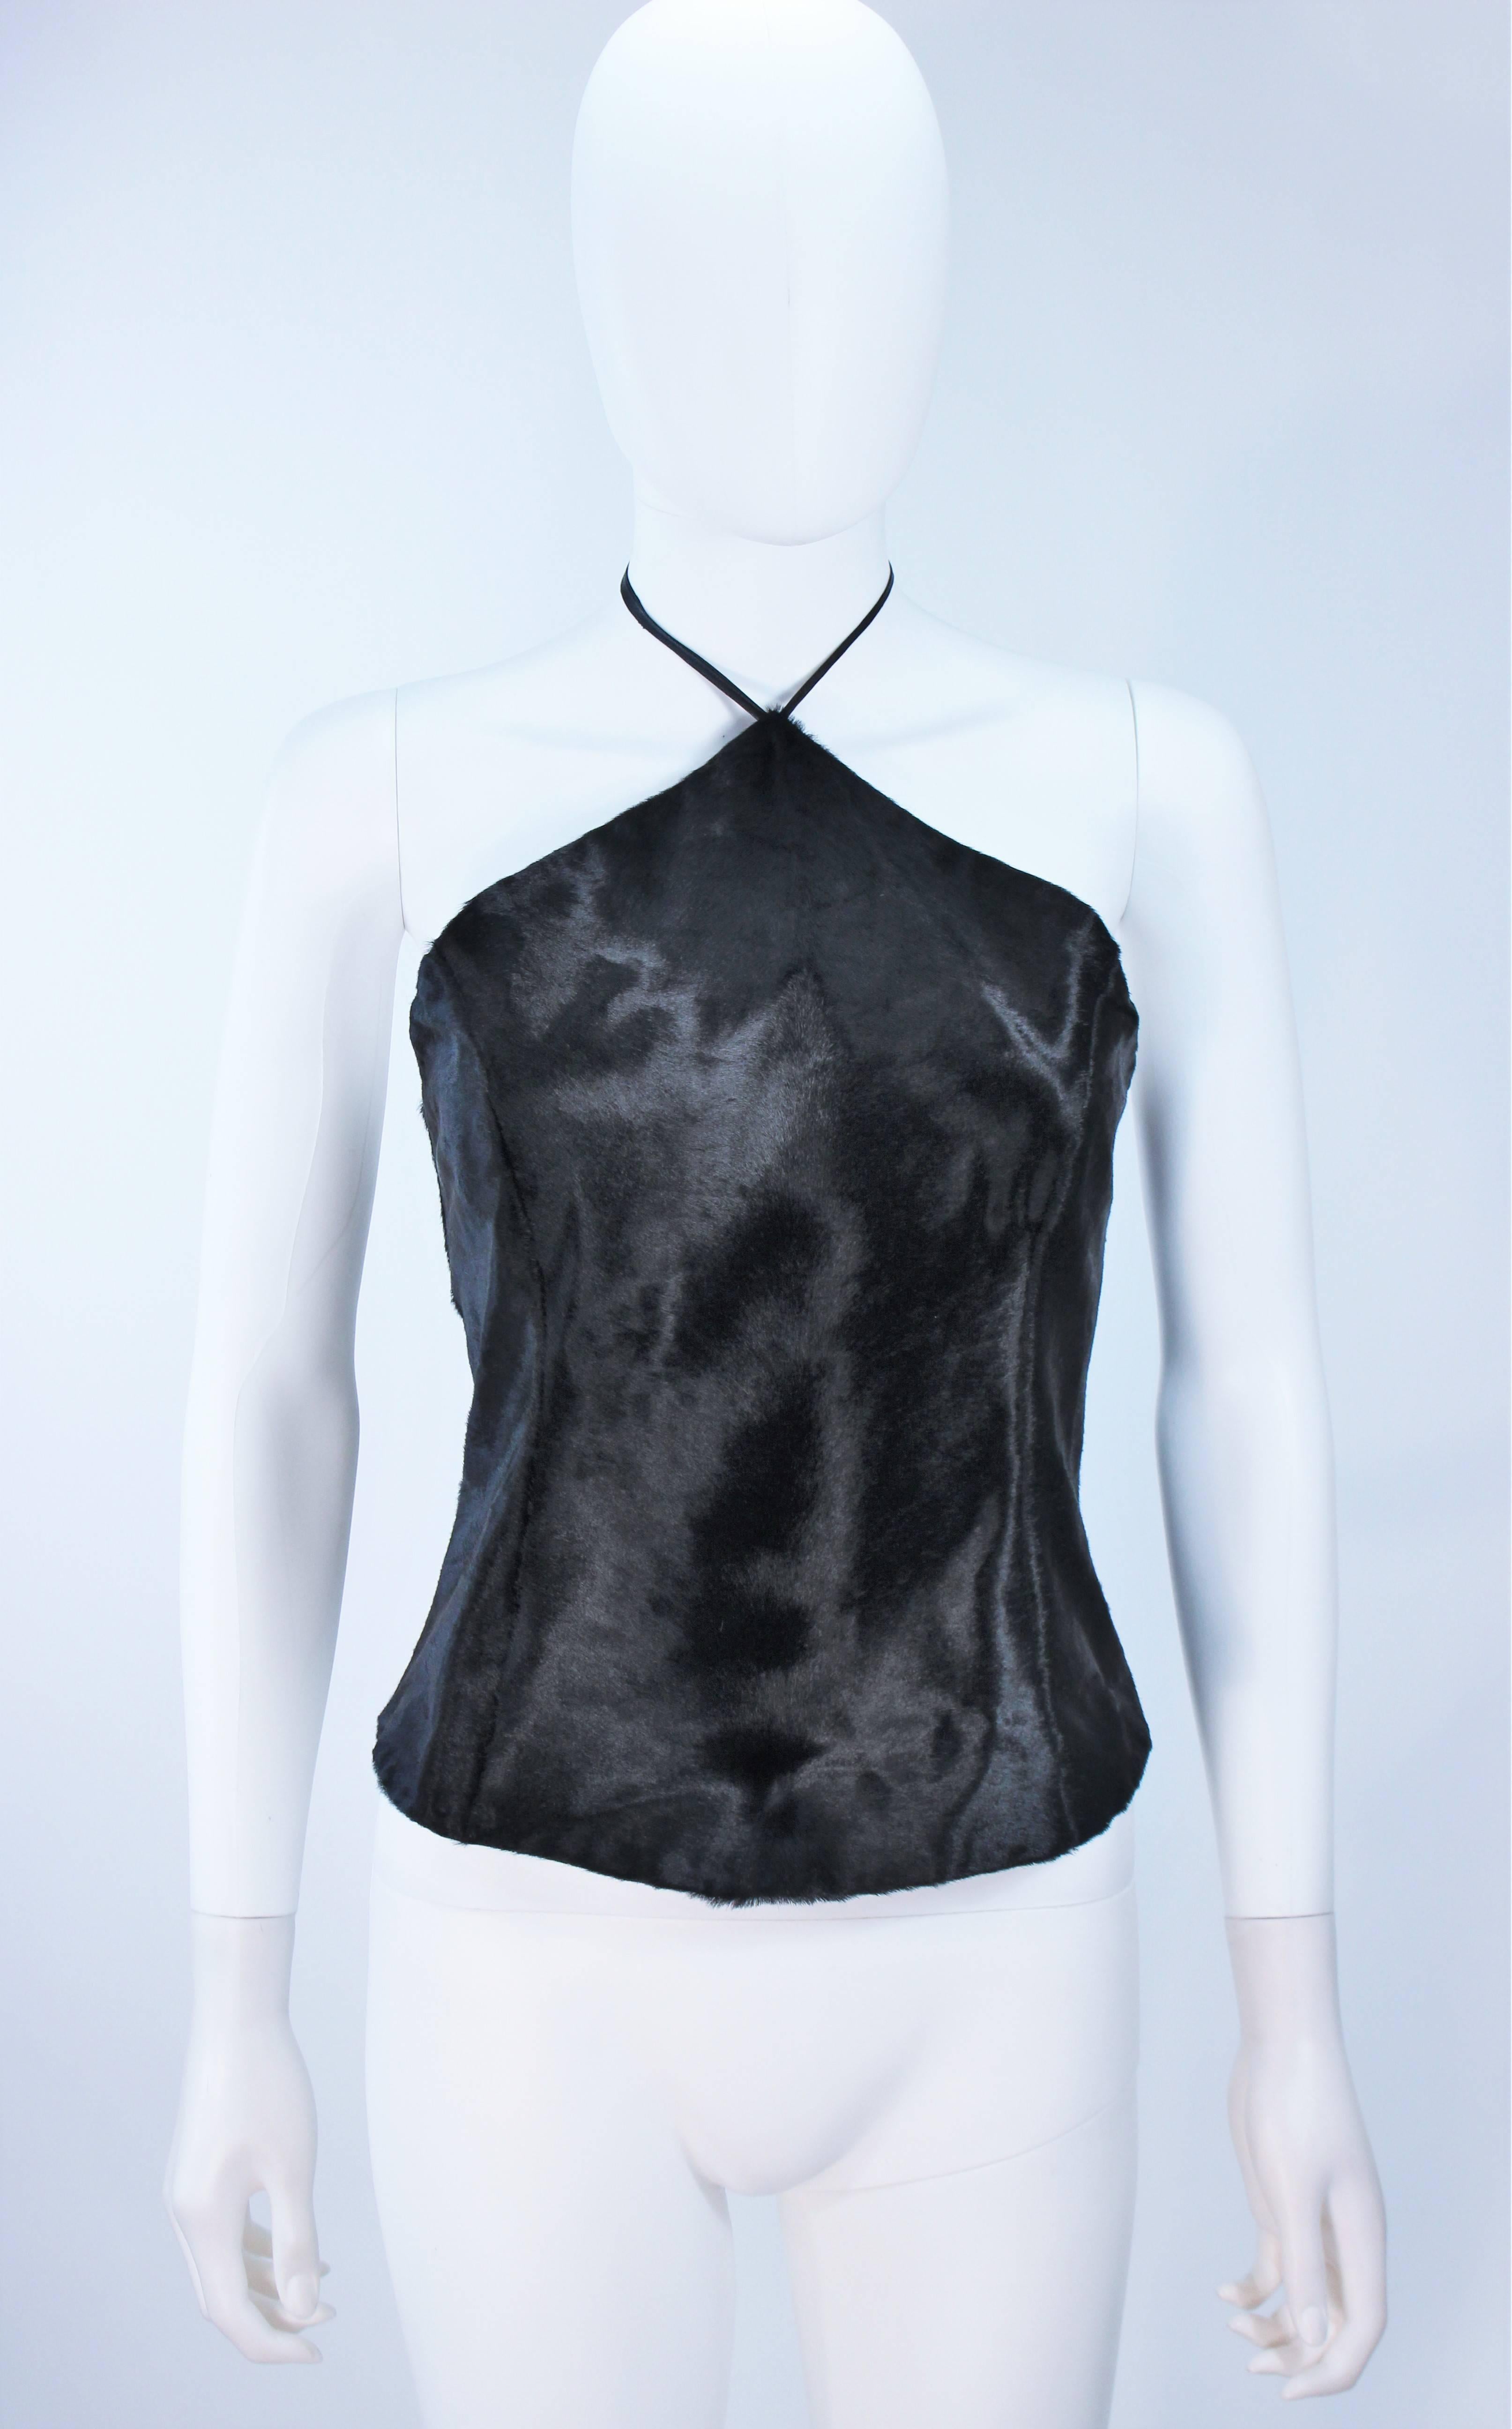  This Vera Wang  top is composed of a striking black cowhide and features leather tie accents. There is a center back zipper closure. In excellent vintage condition with original tags.
 
  **Please cross-reference measurements for personal